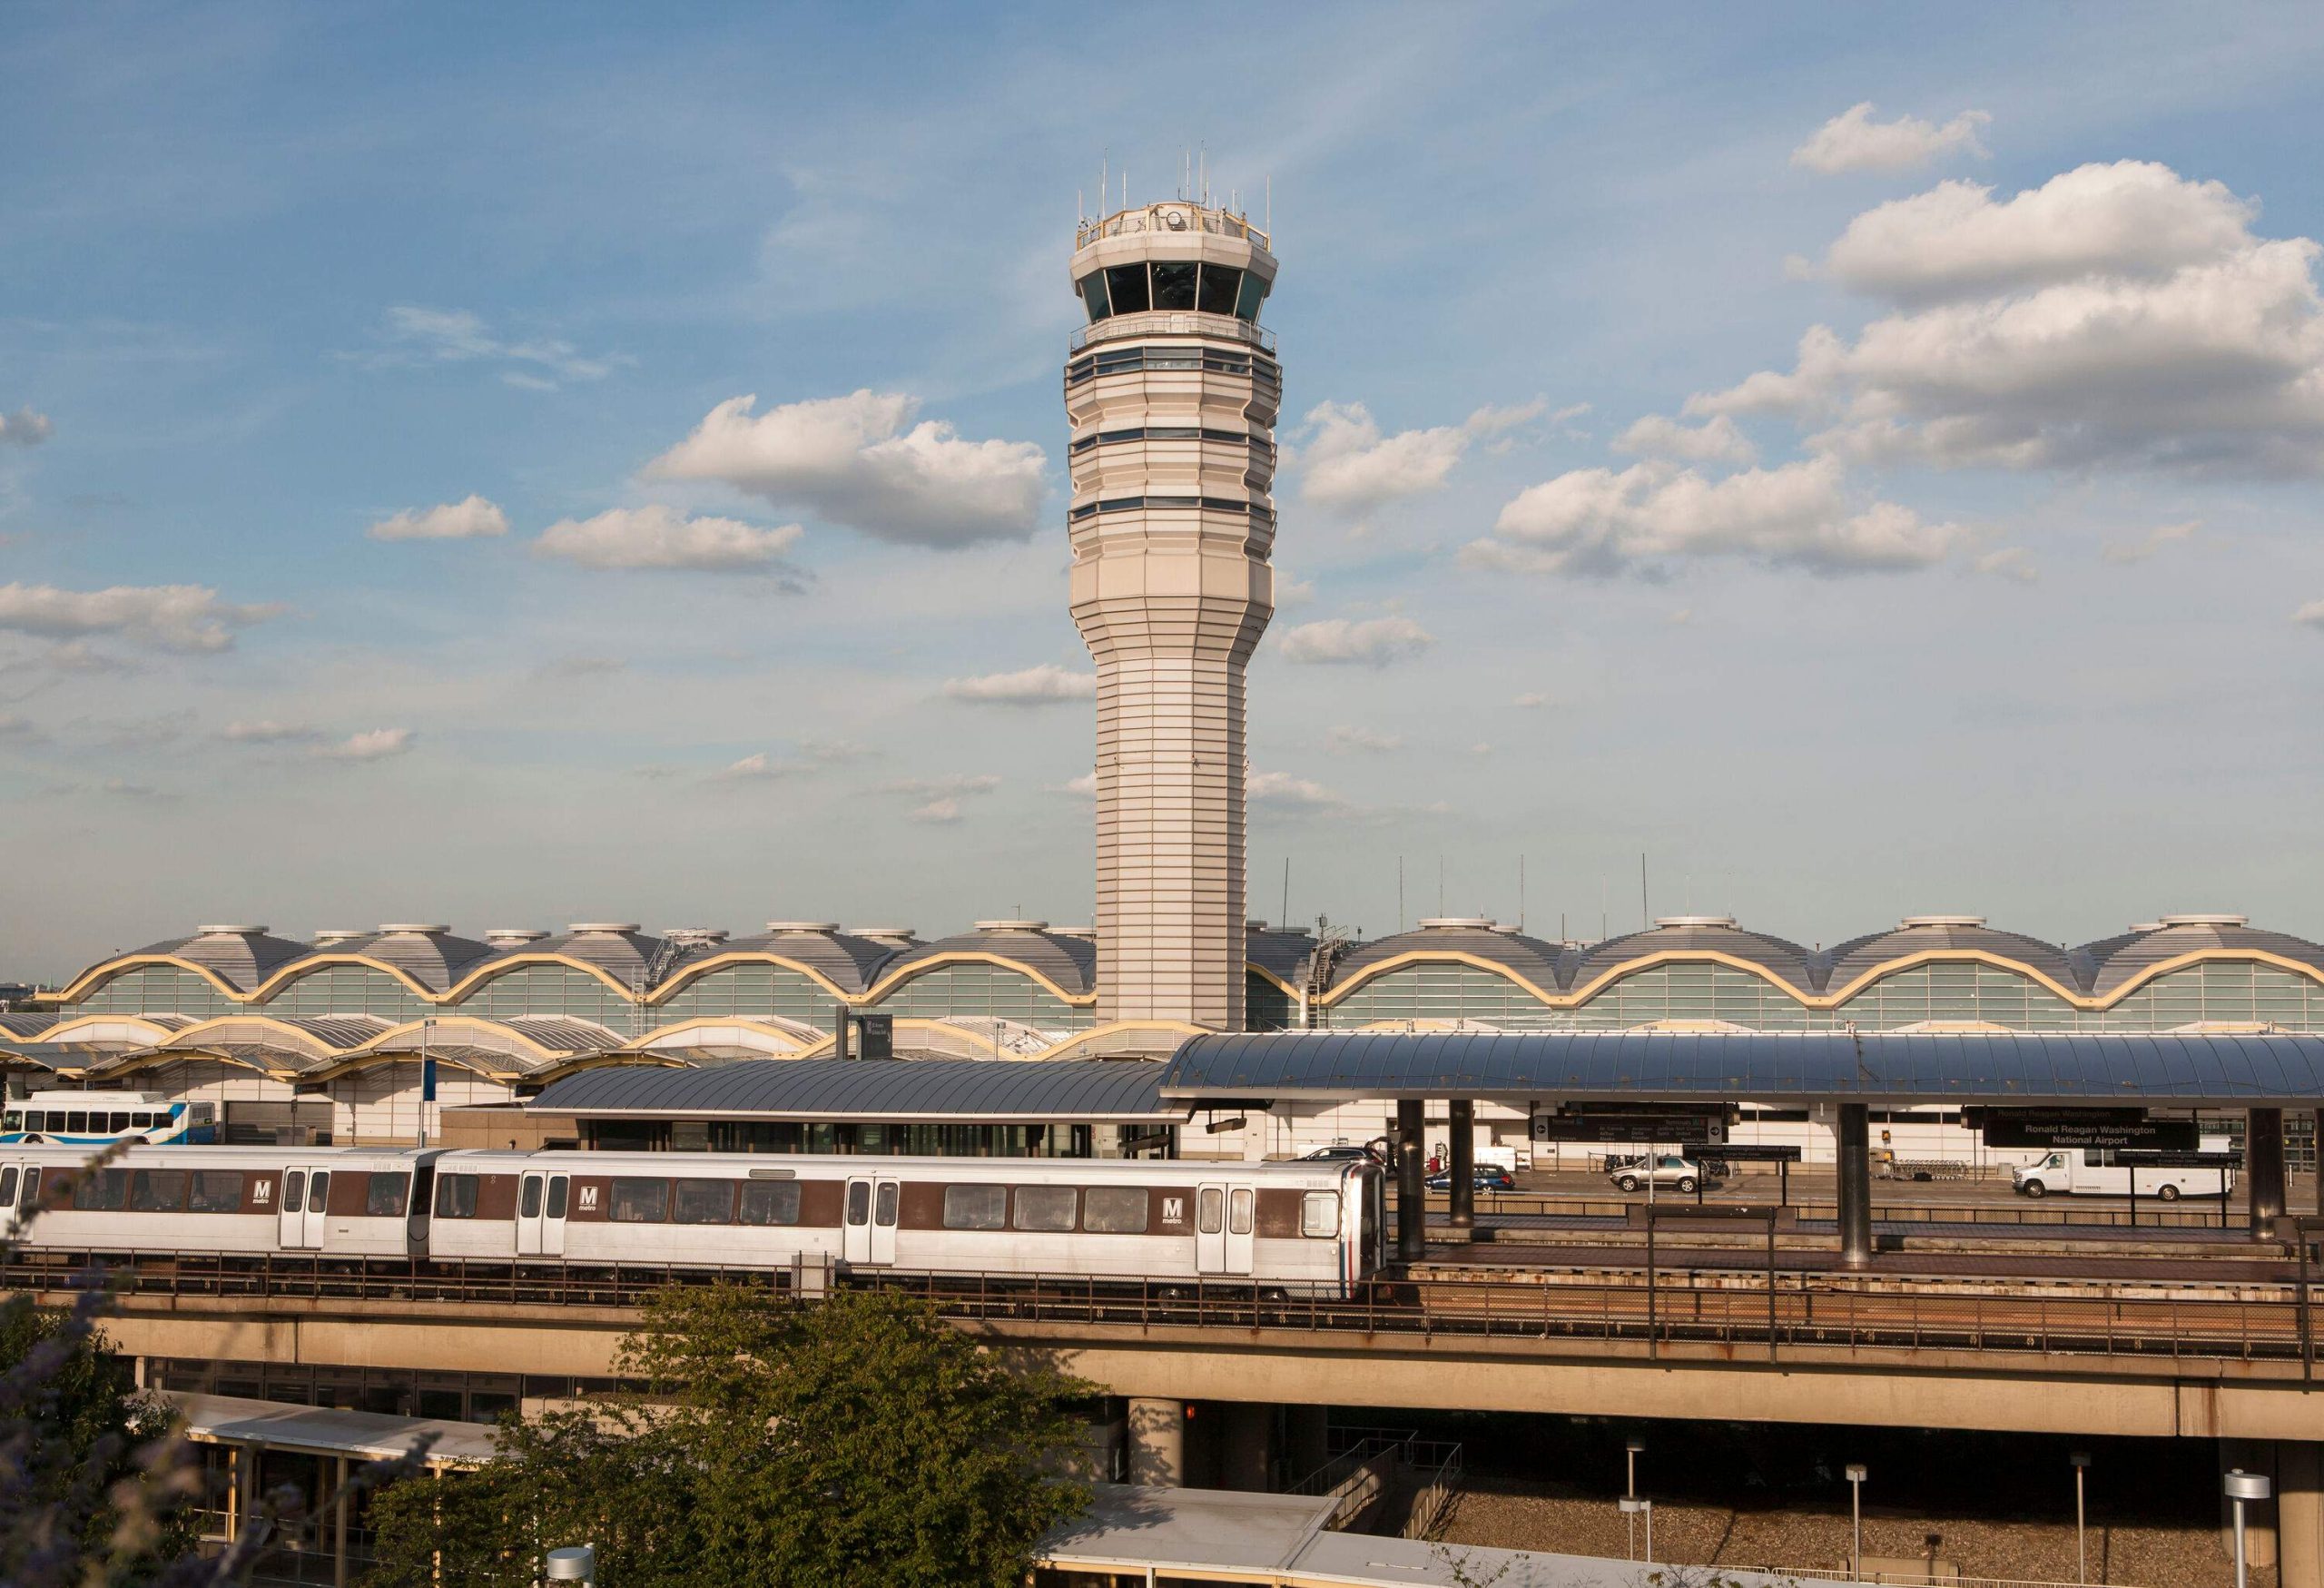 The control tower of Reagan National Airport rises majestically above the bustling terminal, while the nearby Washington Metro adds a touch of urban connectivity, creating a seamless transportation hub for travellers.